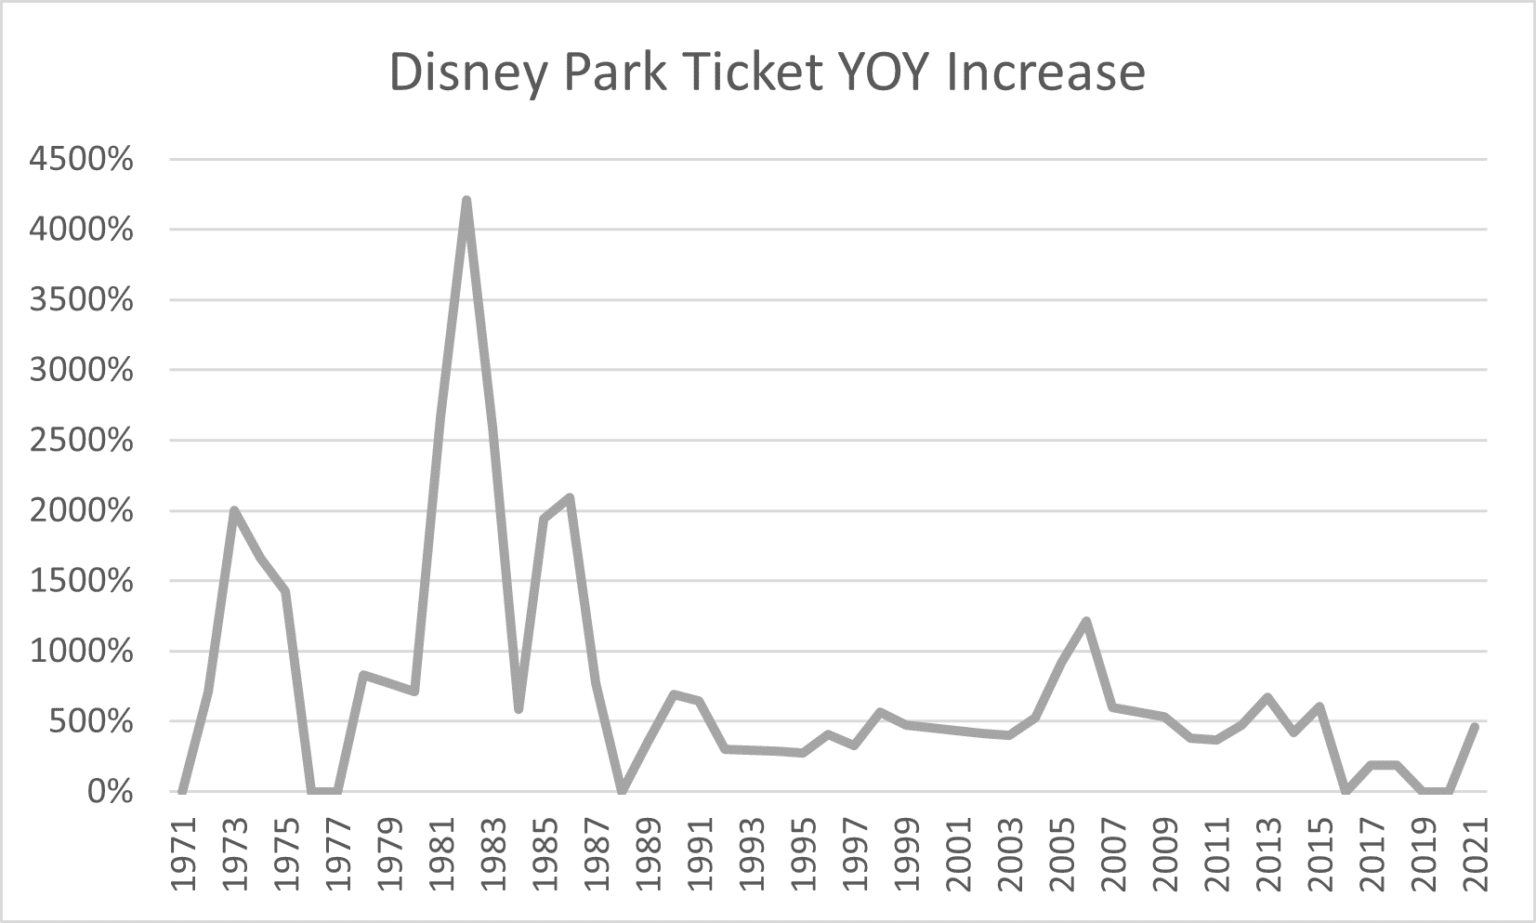 How Much Have Disney World Ticket Prices Gone Up Over the Years?